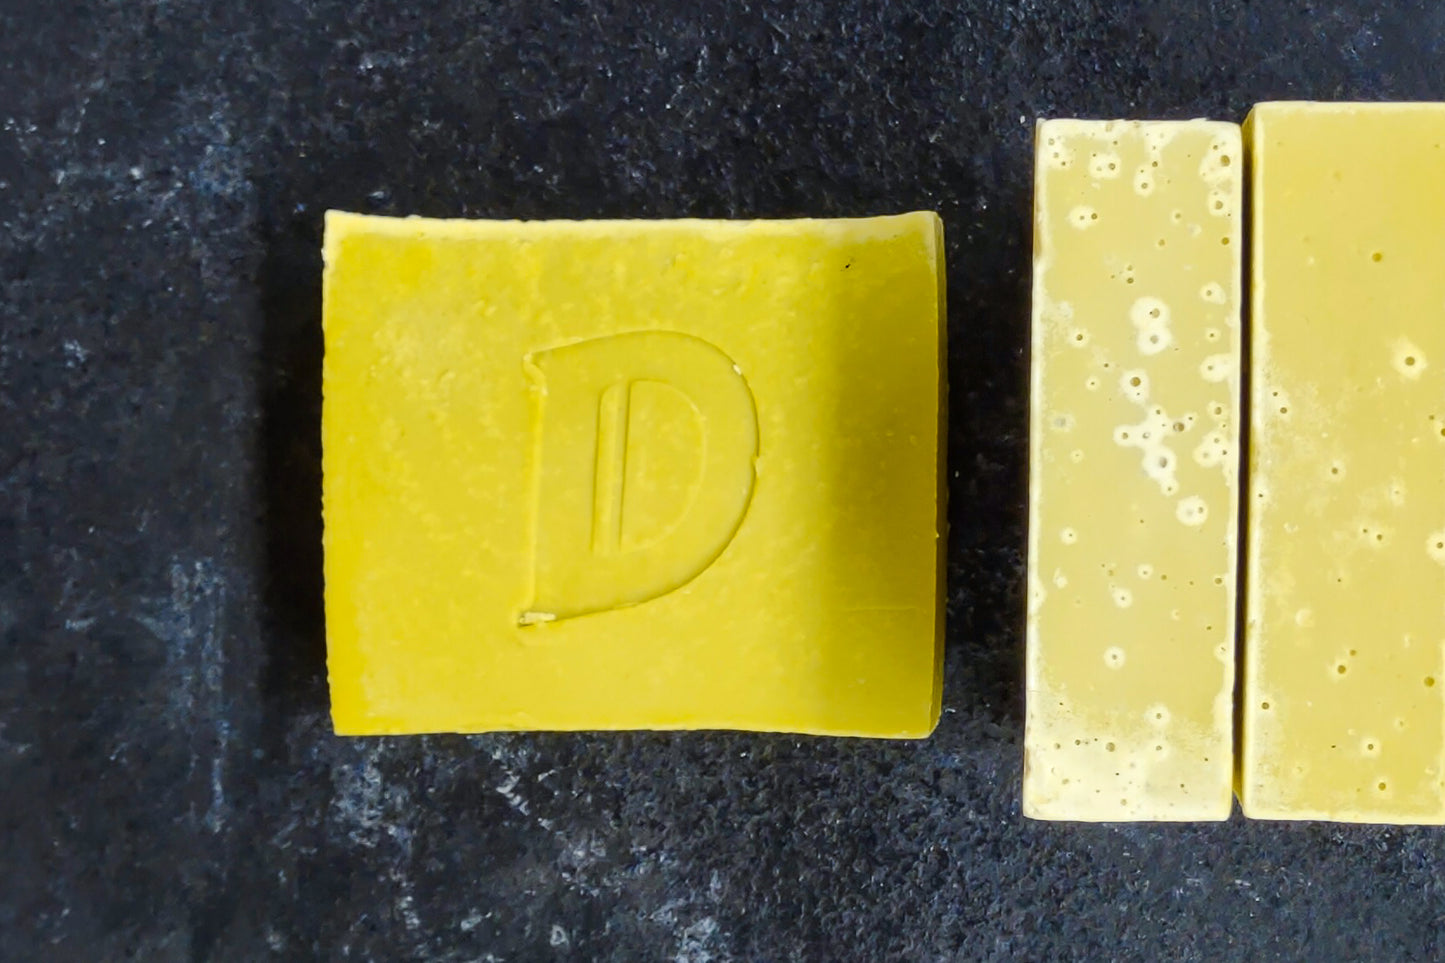 Durant Castile Olive Oil Handcrafted Rough Cut Soap Bar